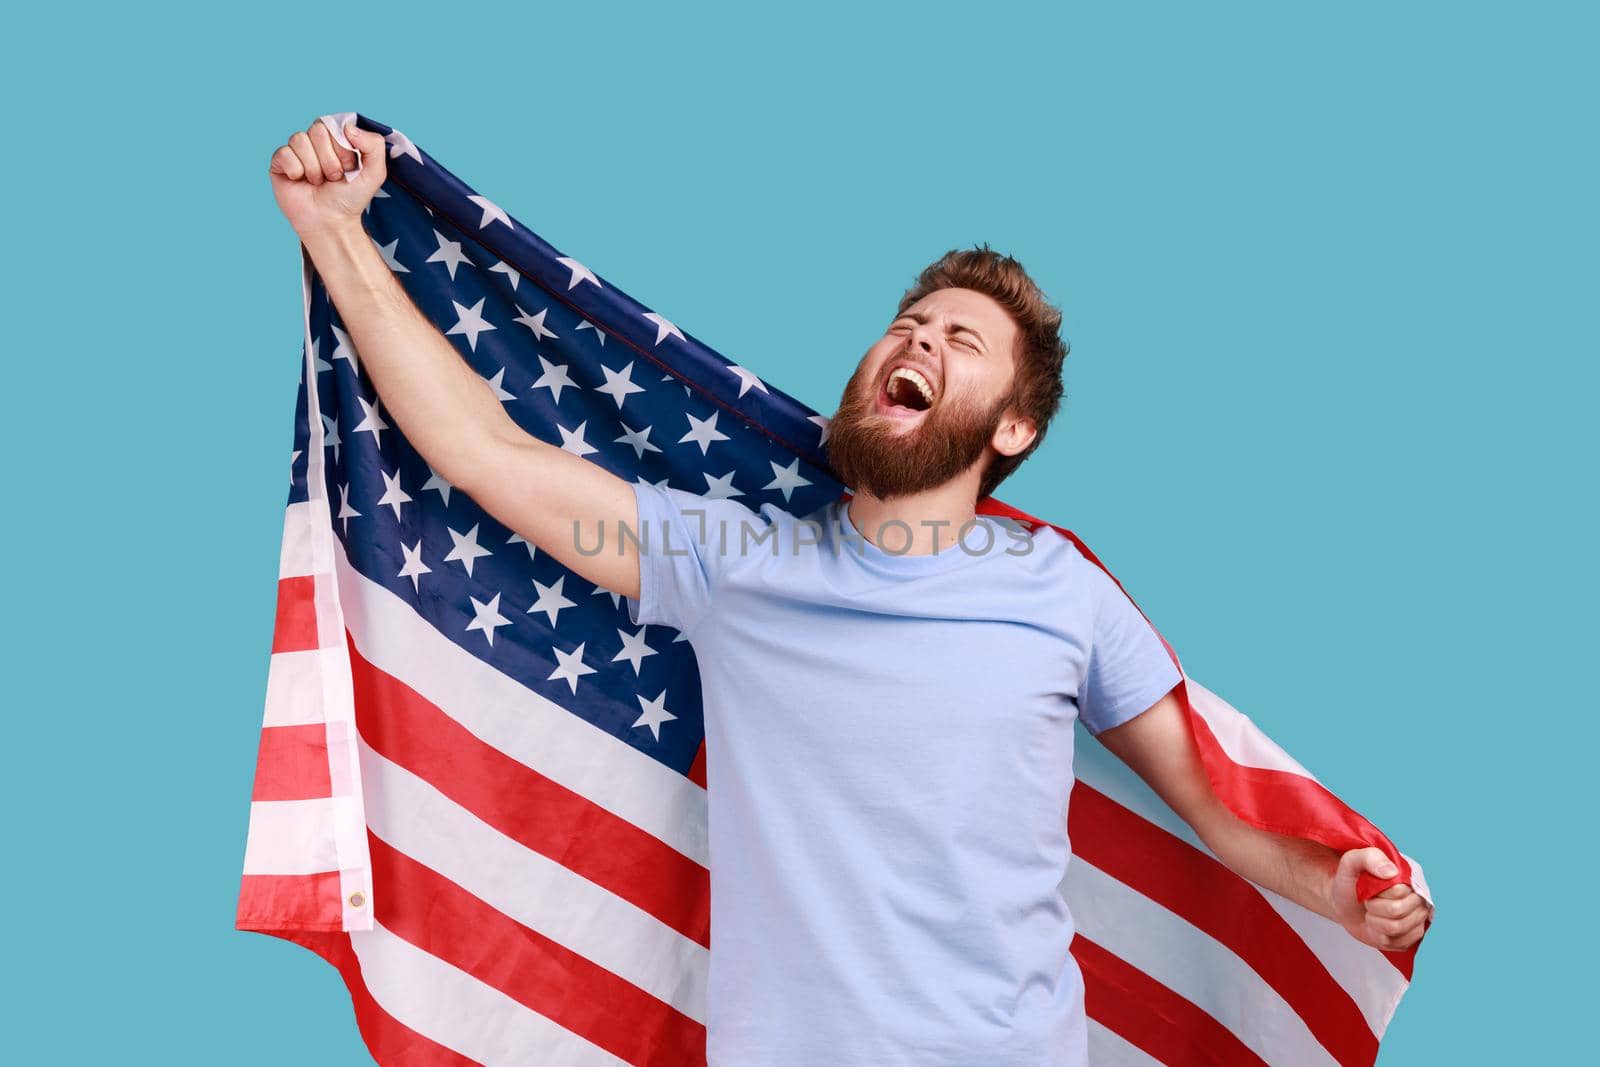 Man holds huge american flag, rejoicing while celebrating national holiday, looking up and yelling. by Khosro1